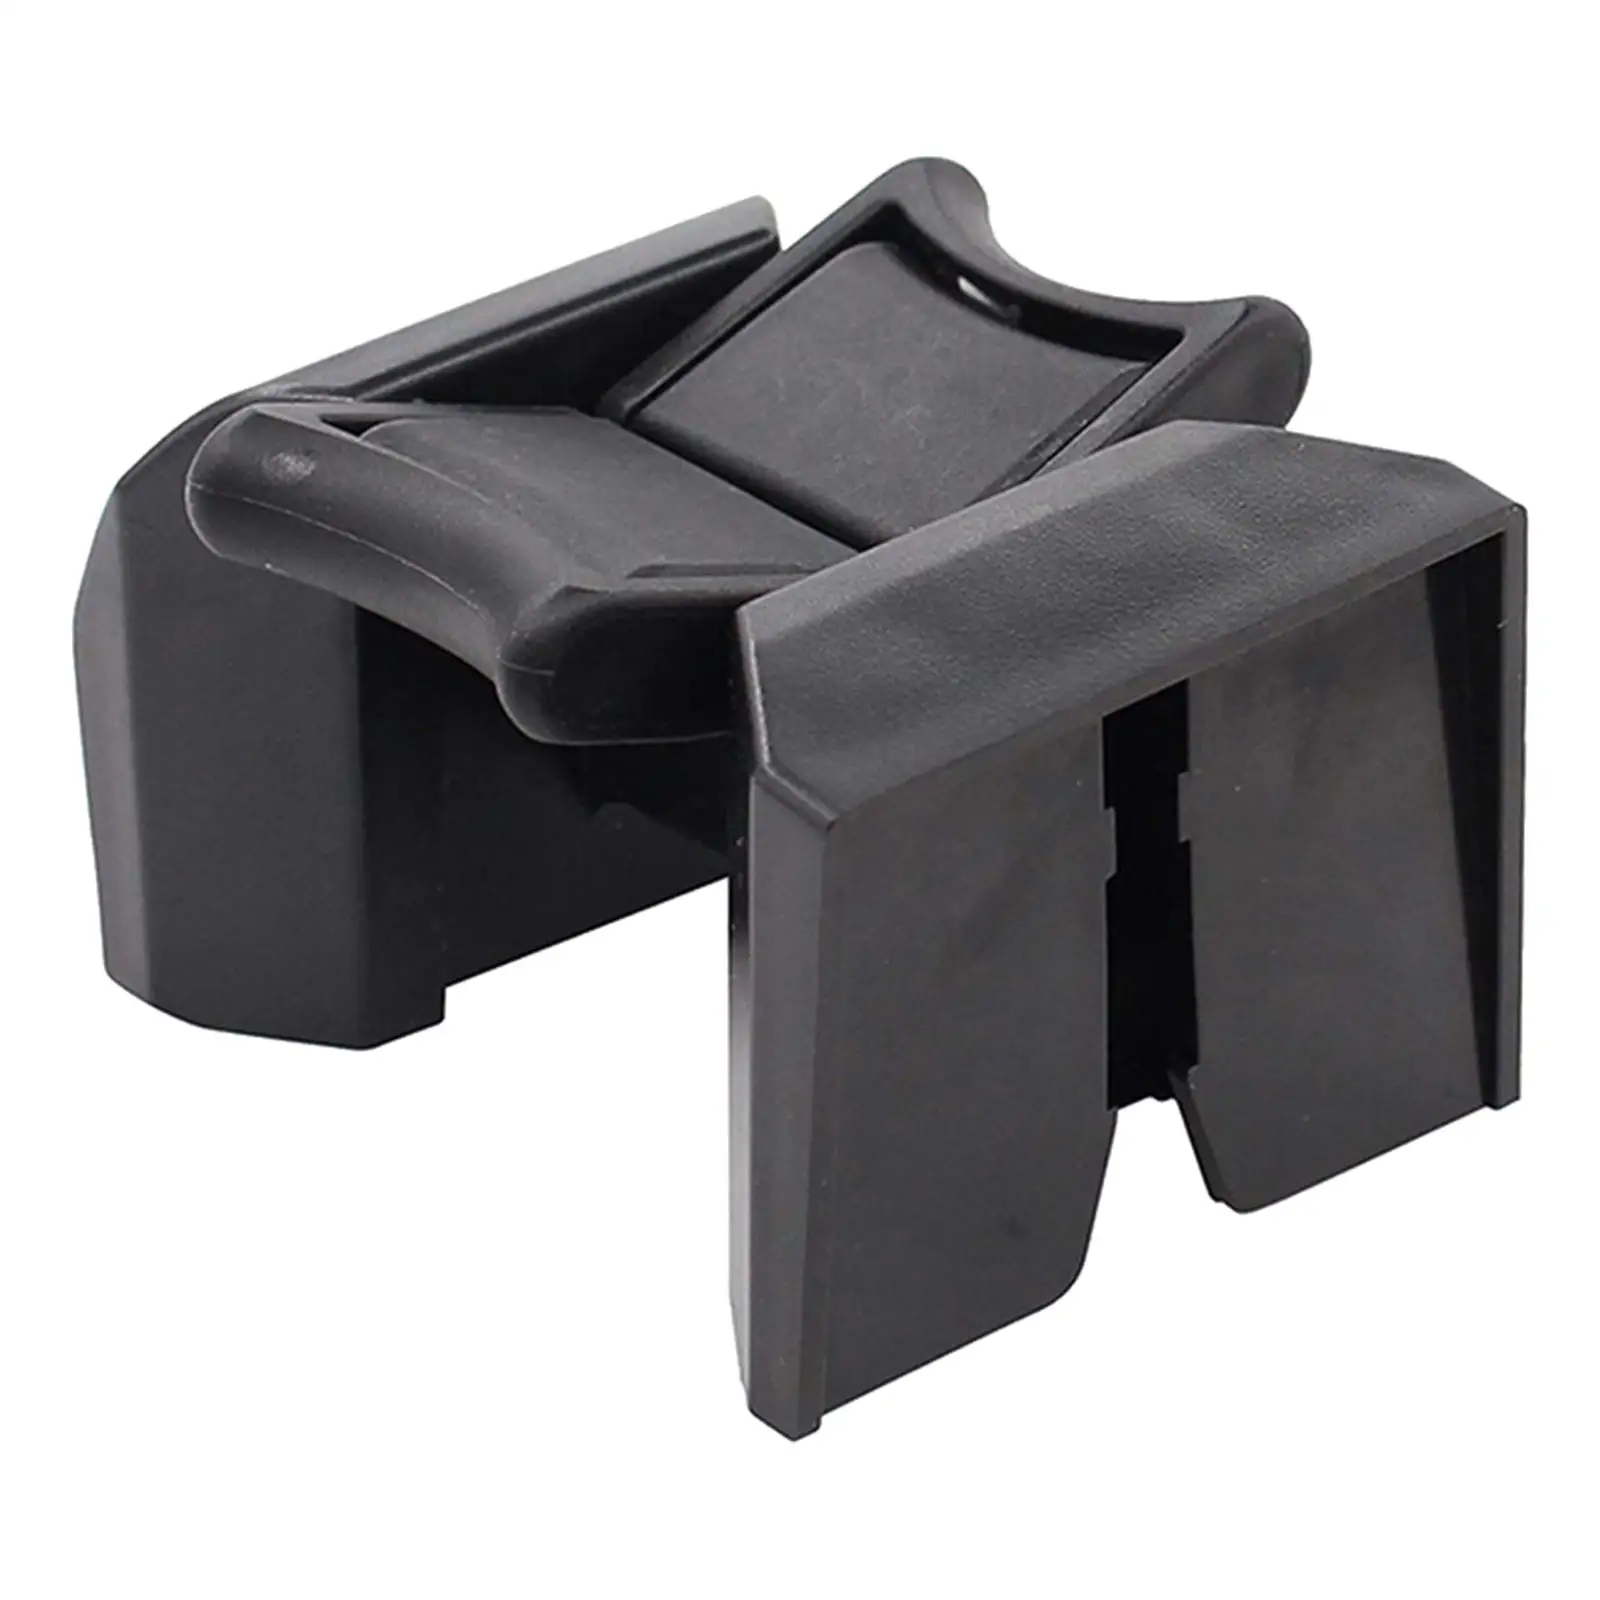 Car Center Console Cup Holder Insert Assembly for Lexus GS300 GS430 Vehicle